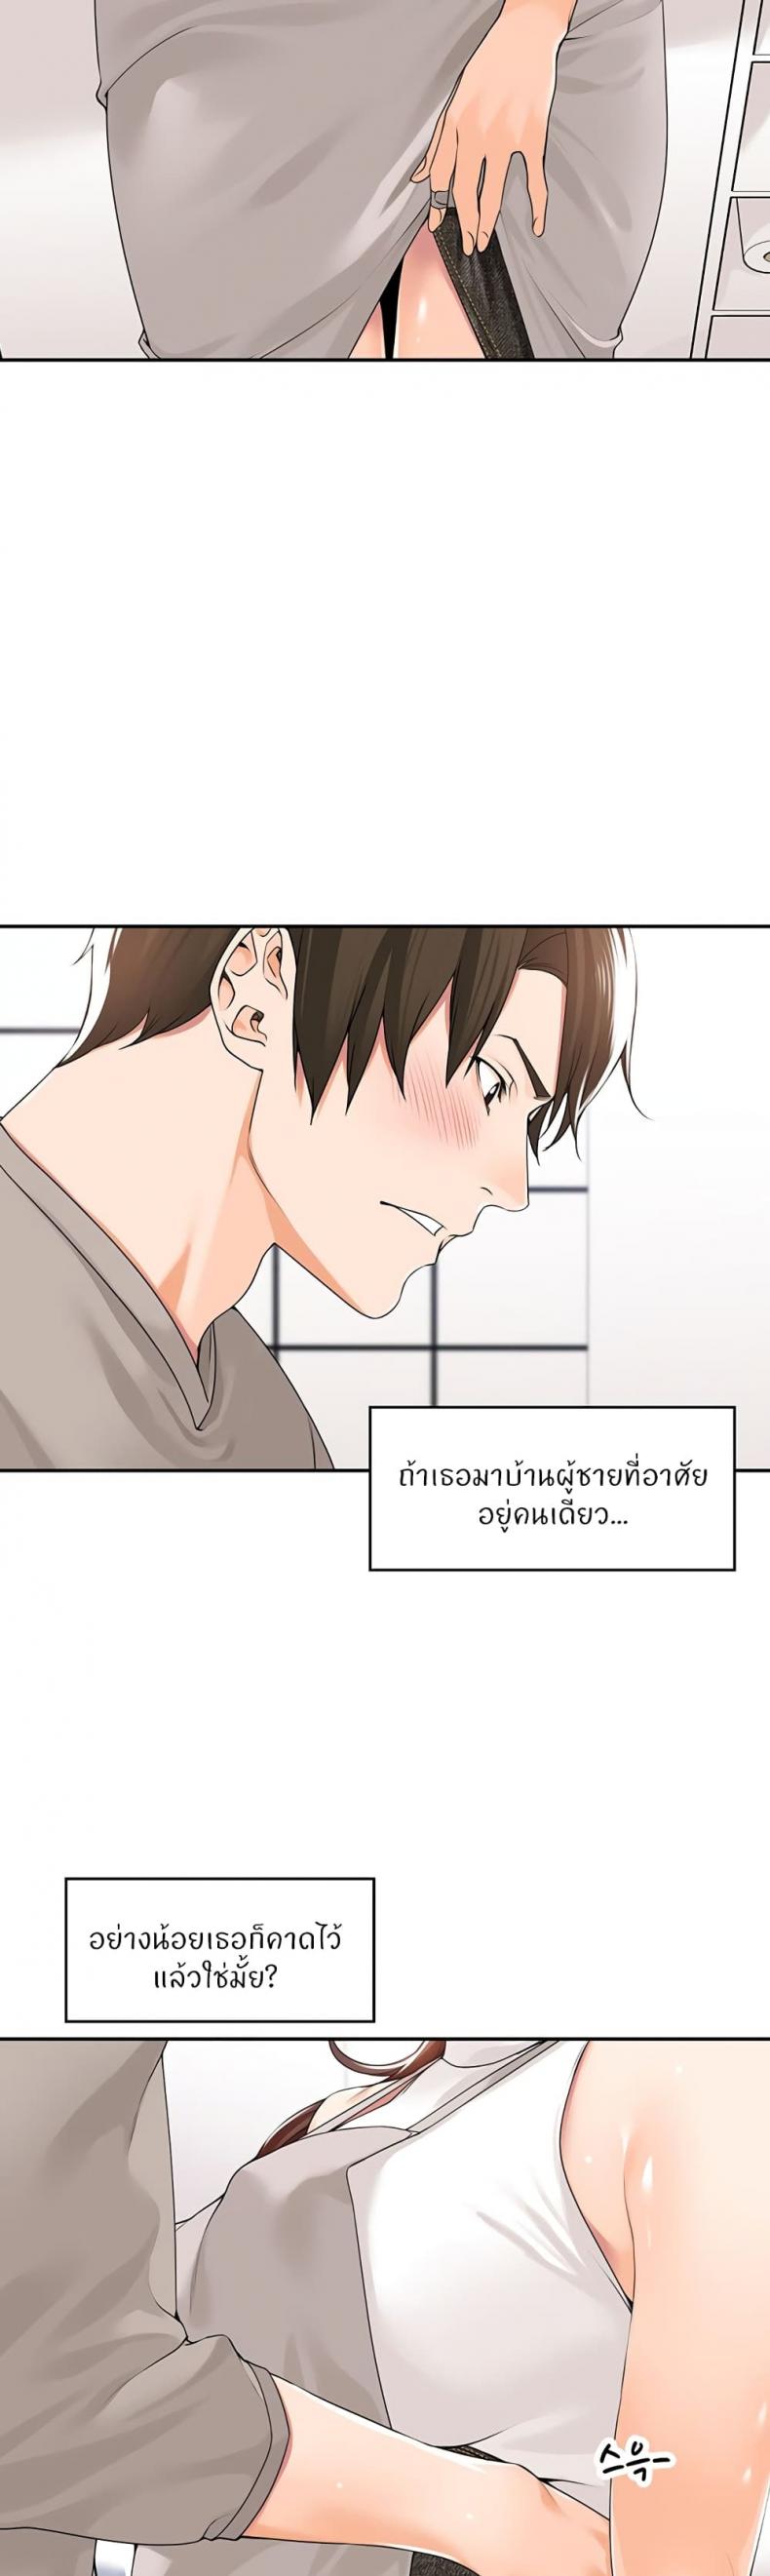 Manager, Please Scold Me 9 ภาพที่ 12